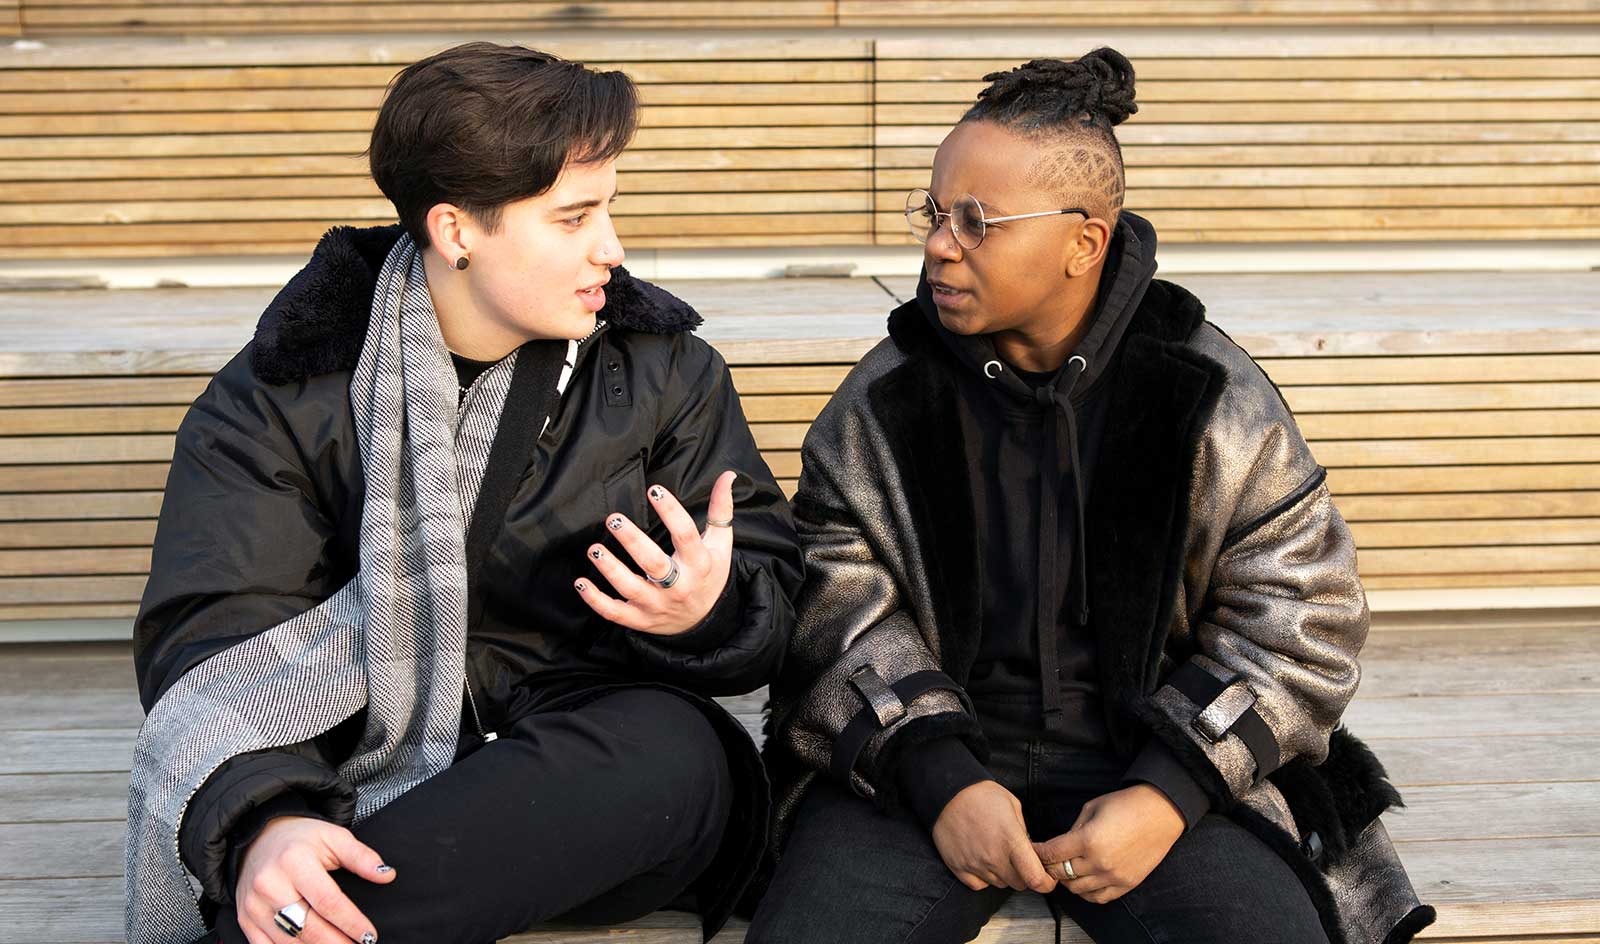 Two trans friends sit on bench and talk to one another